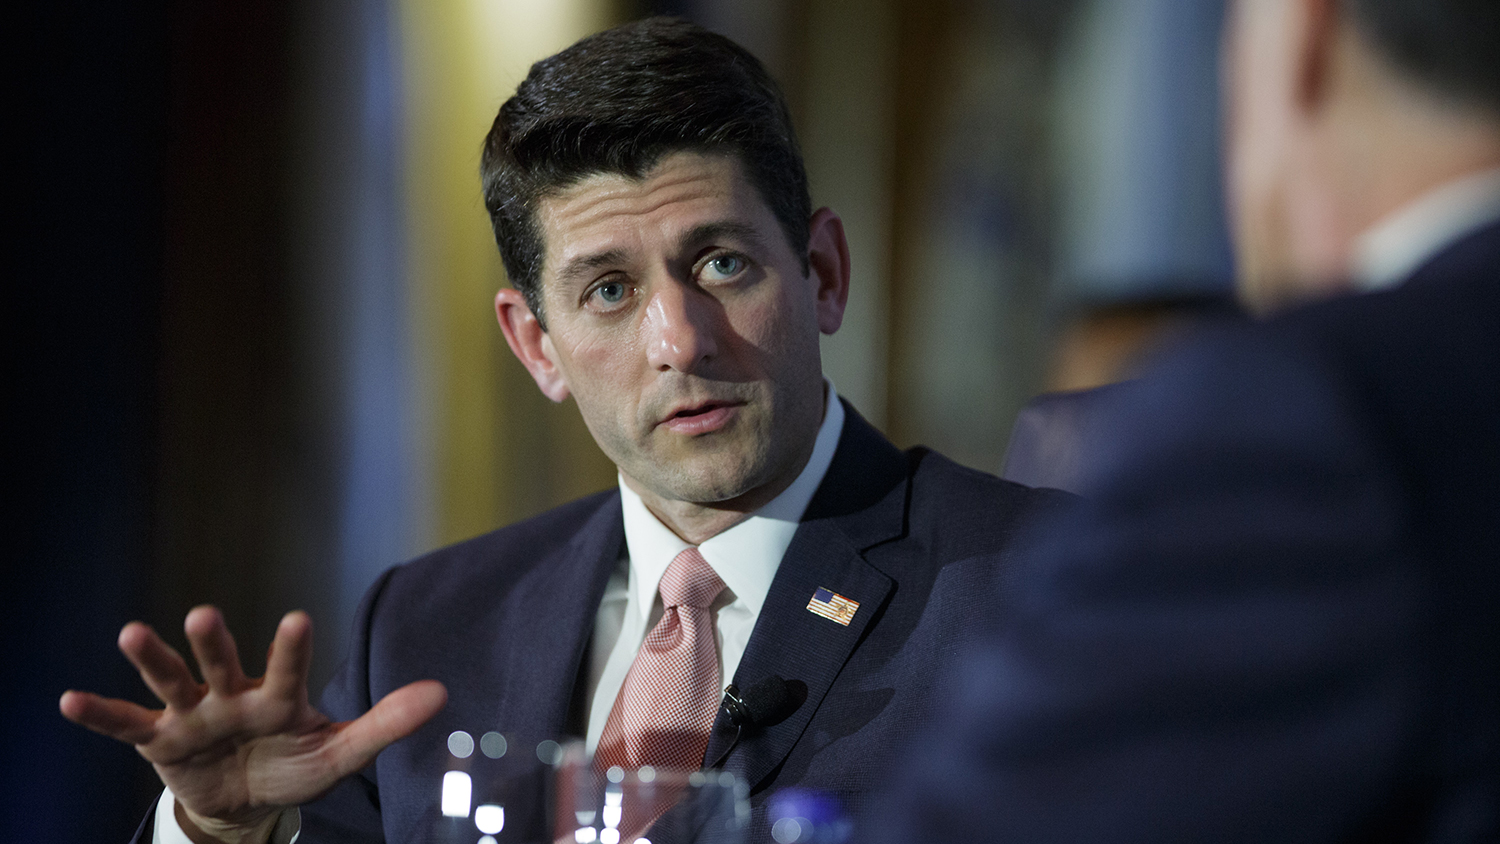 Representative Paul Ryan speaks at the Union League Club of Chicago on Aug. 21, 2014, in Chicago.
